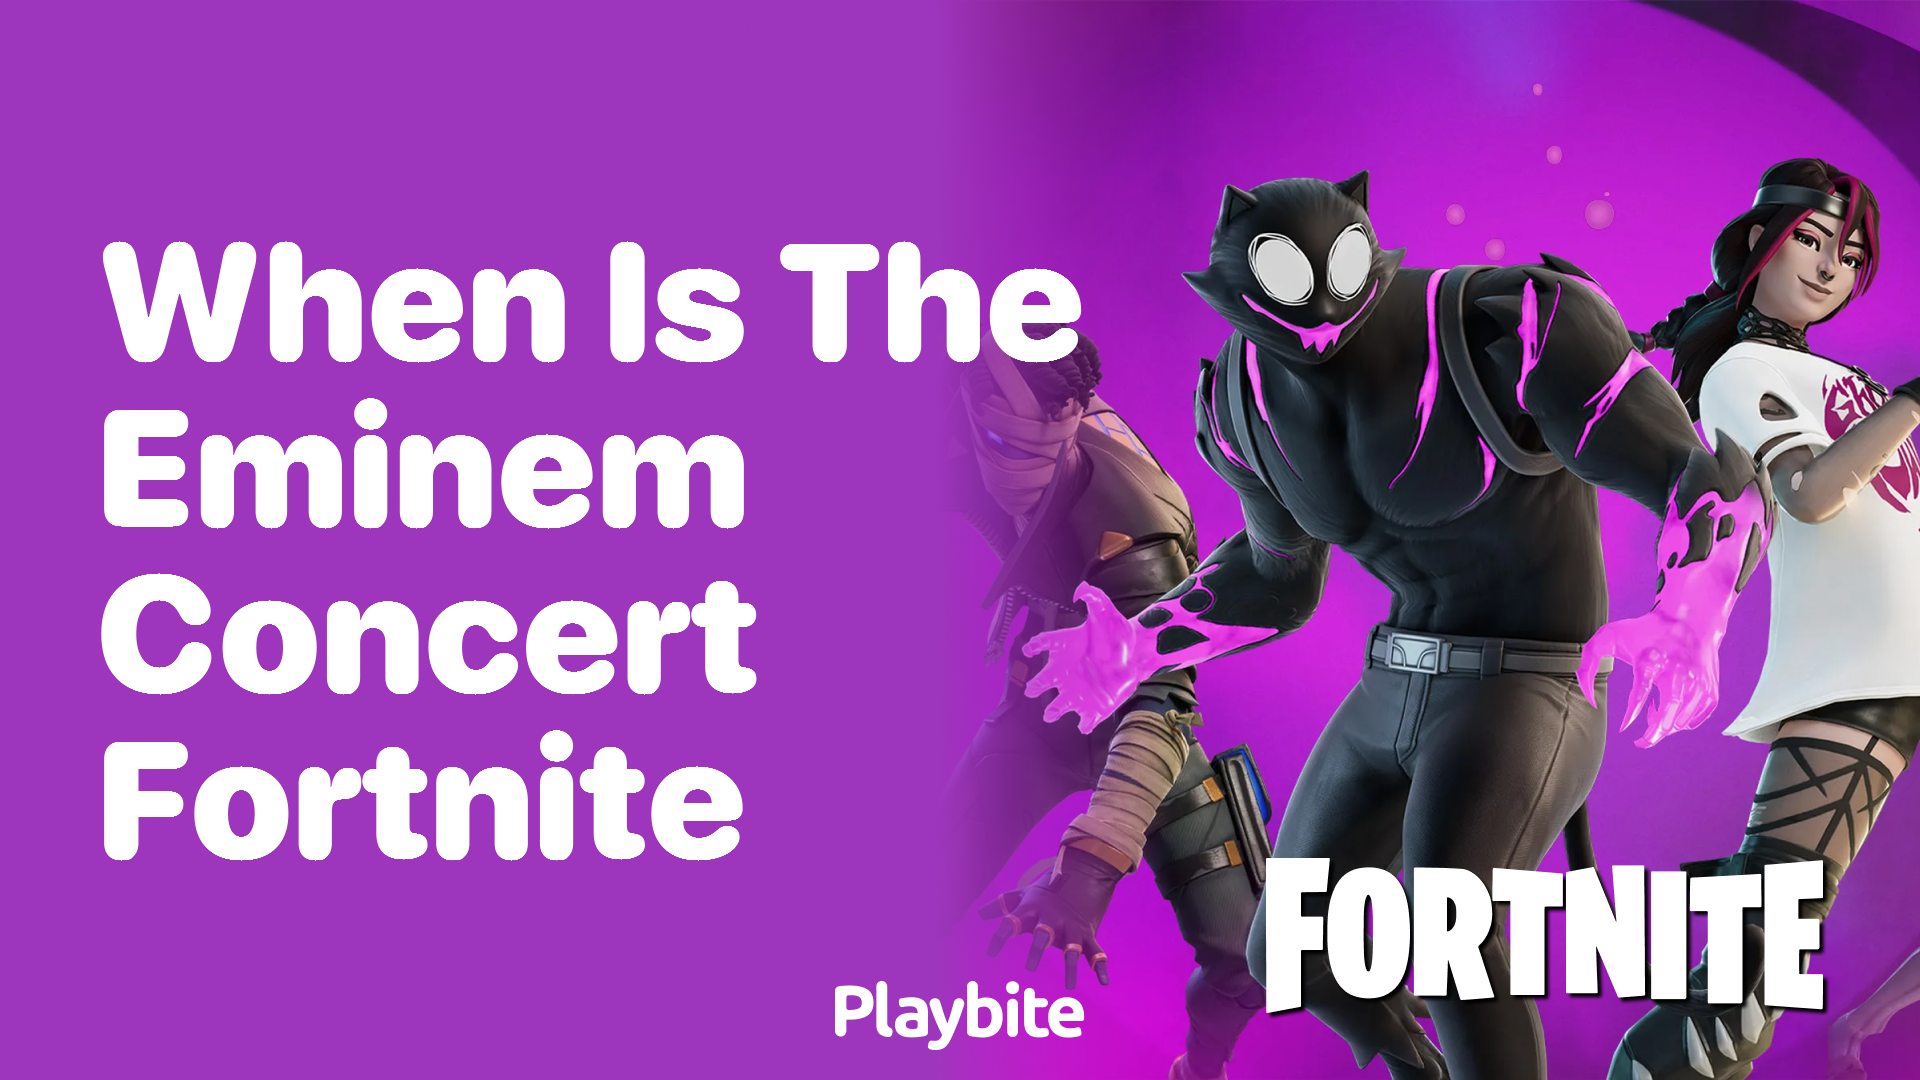 When Is the Eminem Concert in Fortnite?